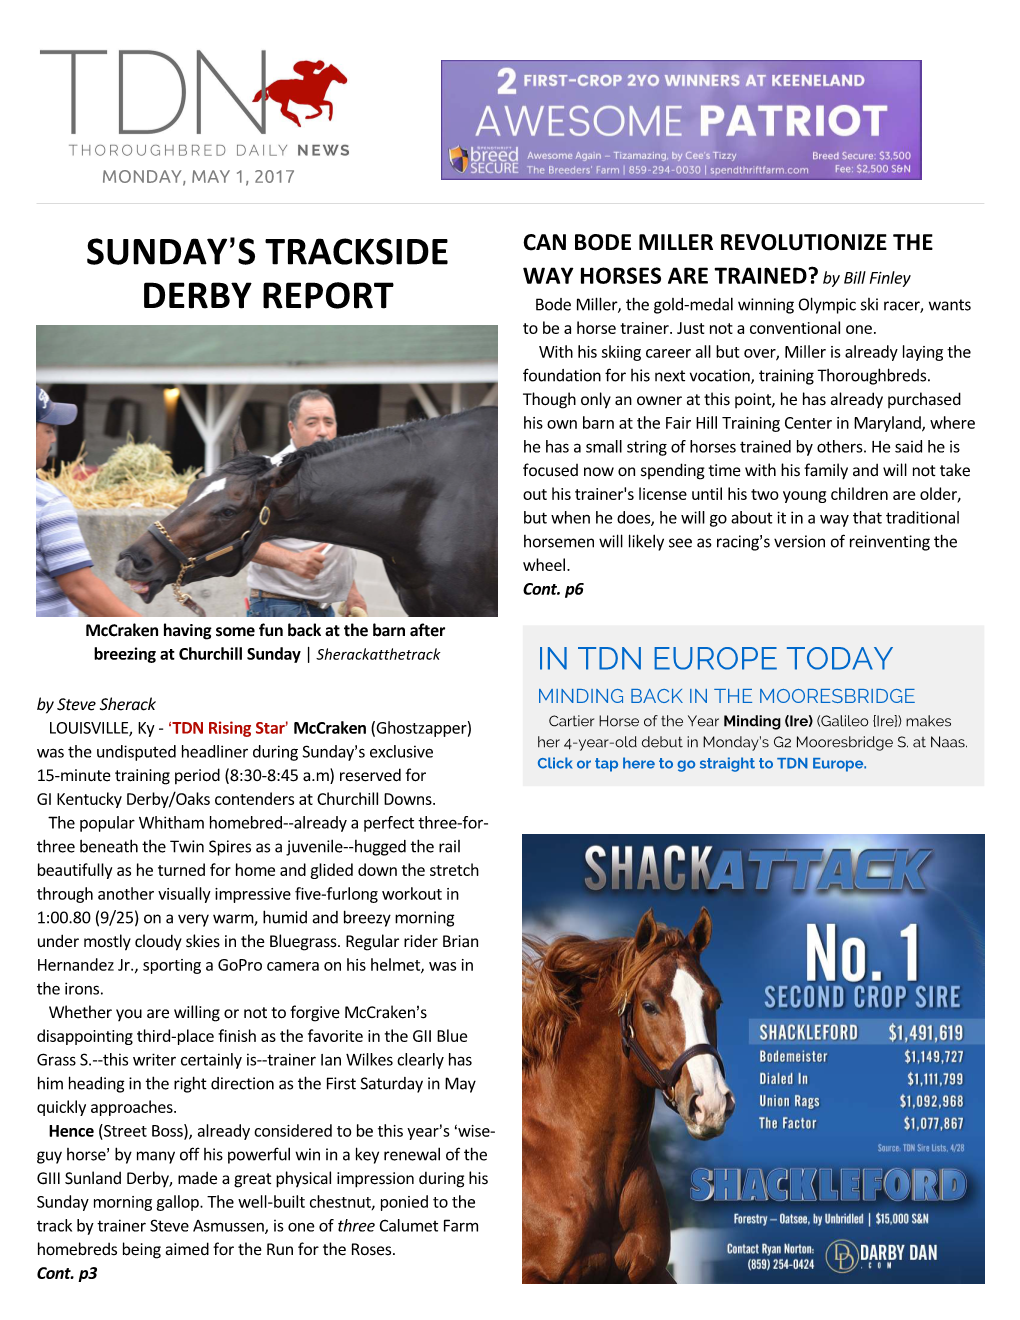 Sunday=S Trackside Derby Report (Cont